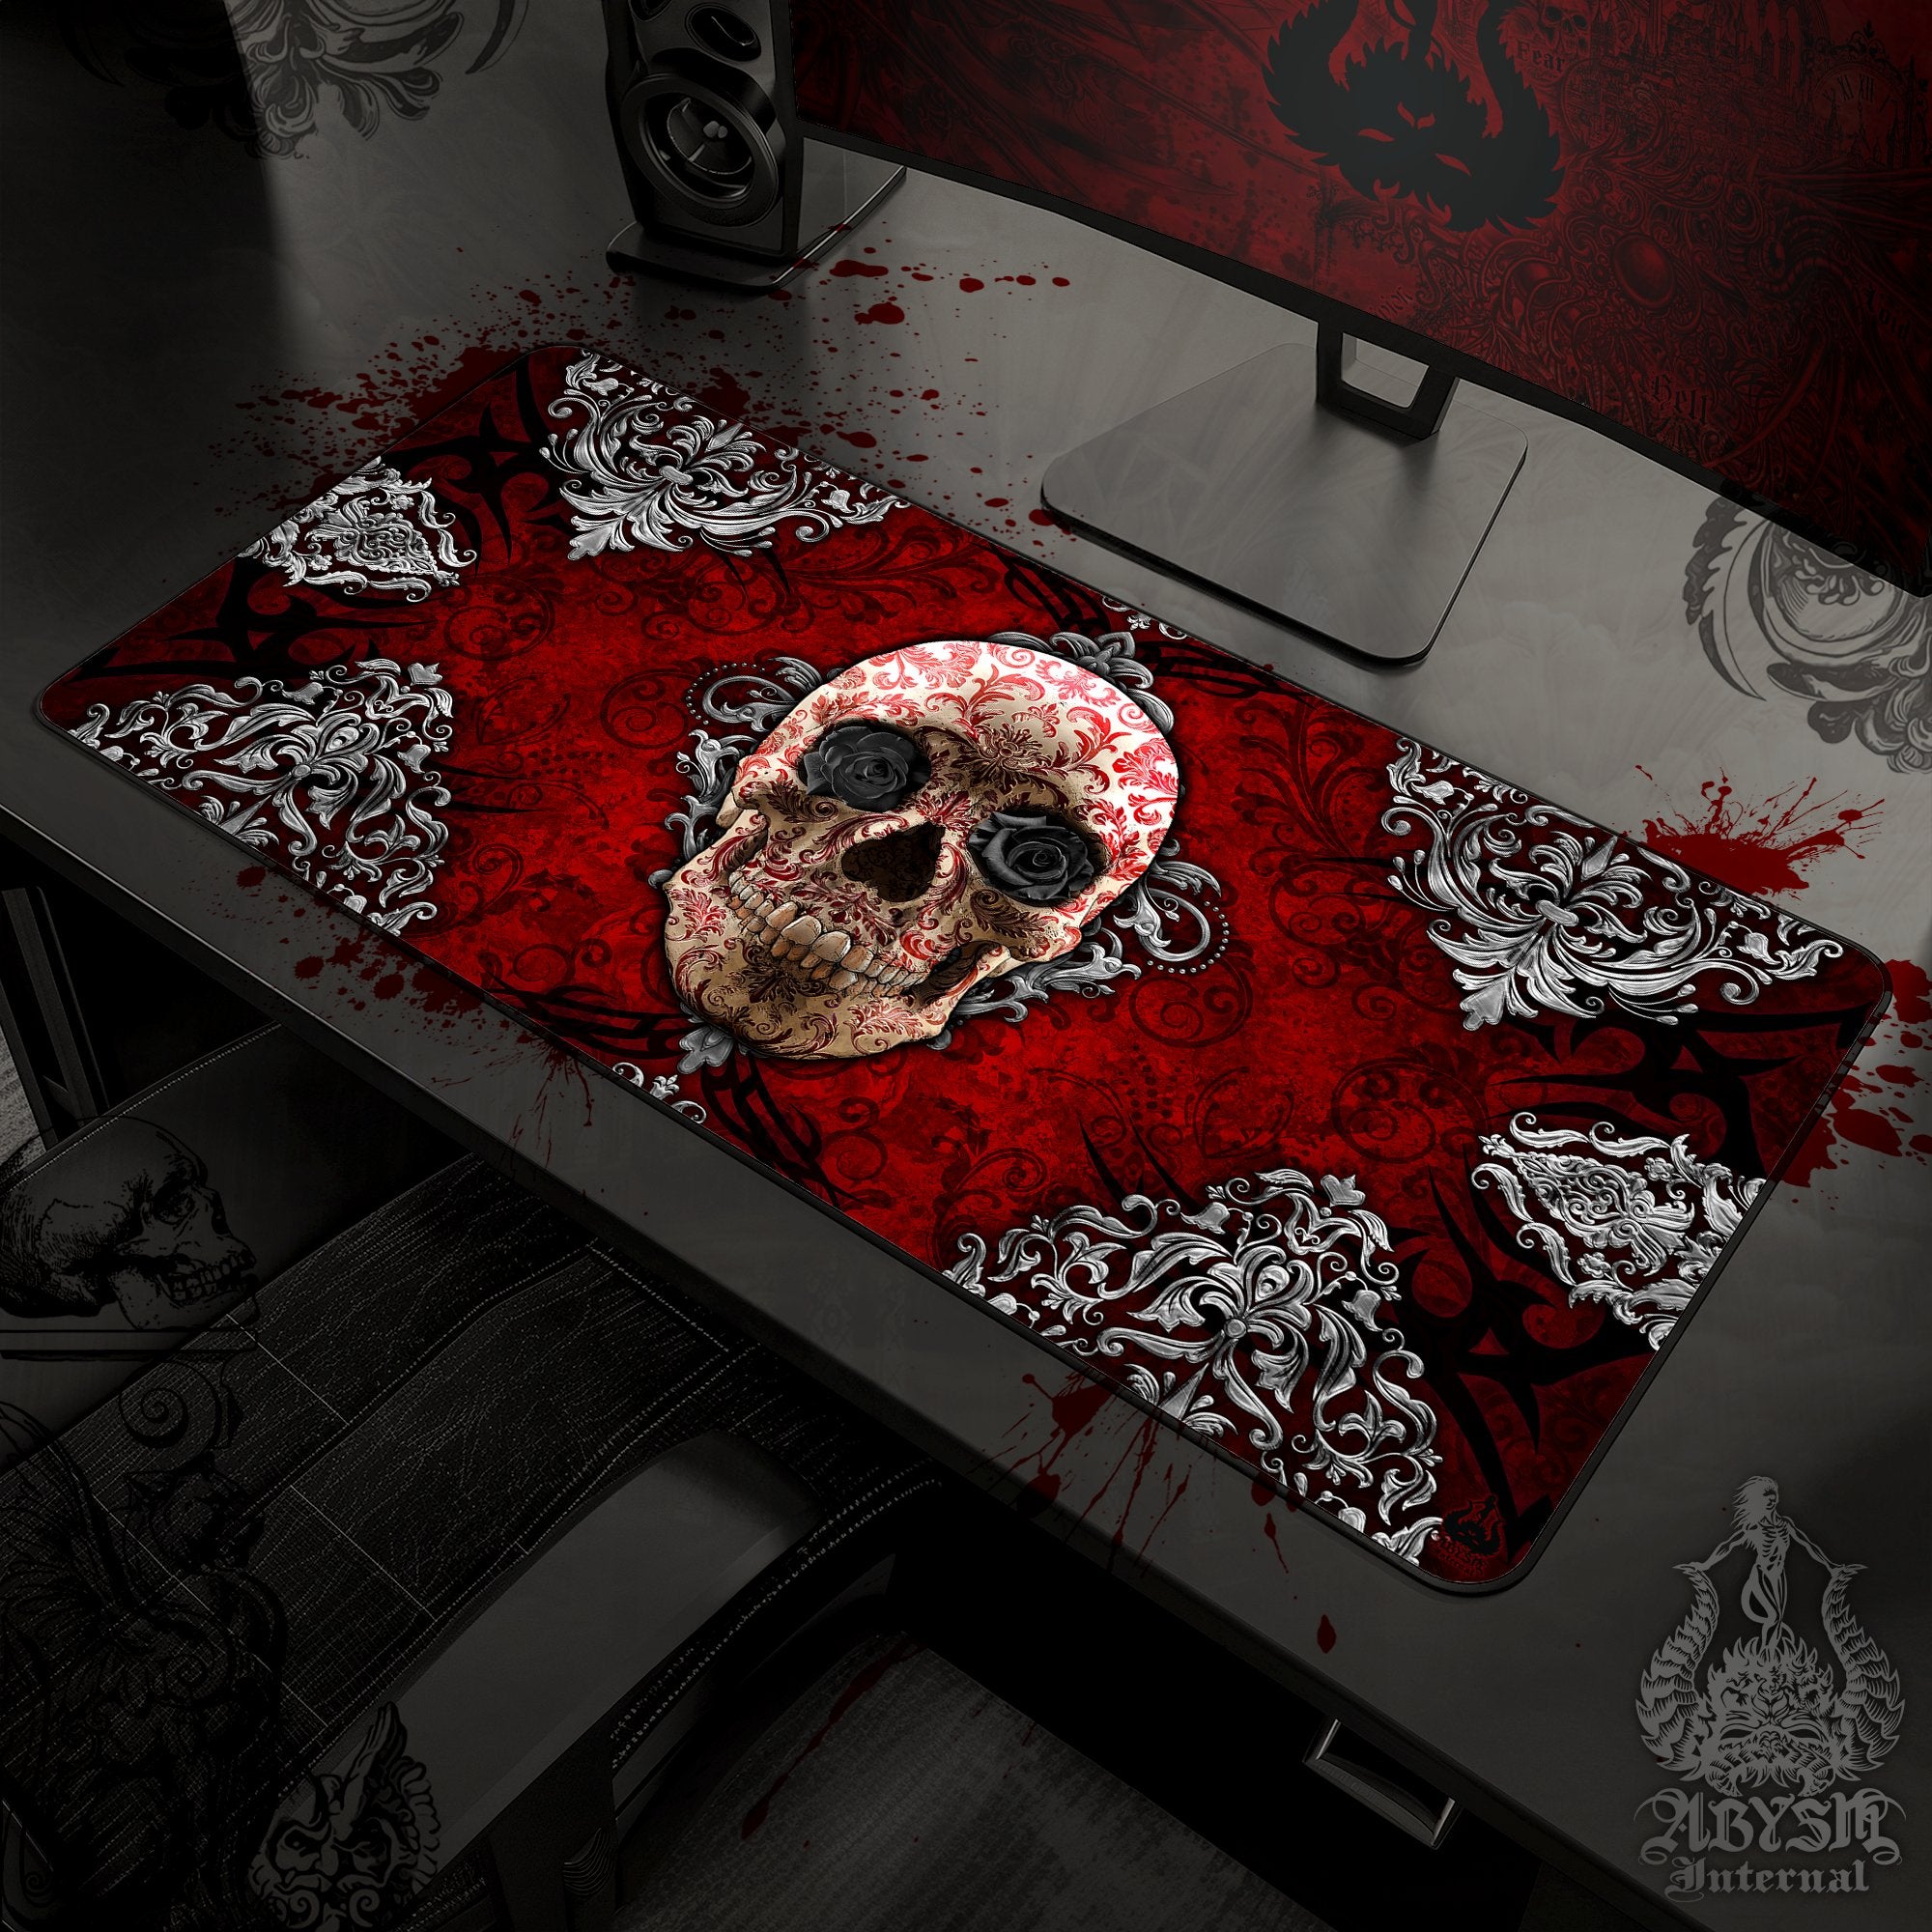 Gothic Gaming Mouse Pad, Skull Desk Mat, Black Roses Table Protector Cover, Goth Workpad, Art Print - Abysm Internal